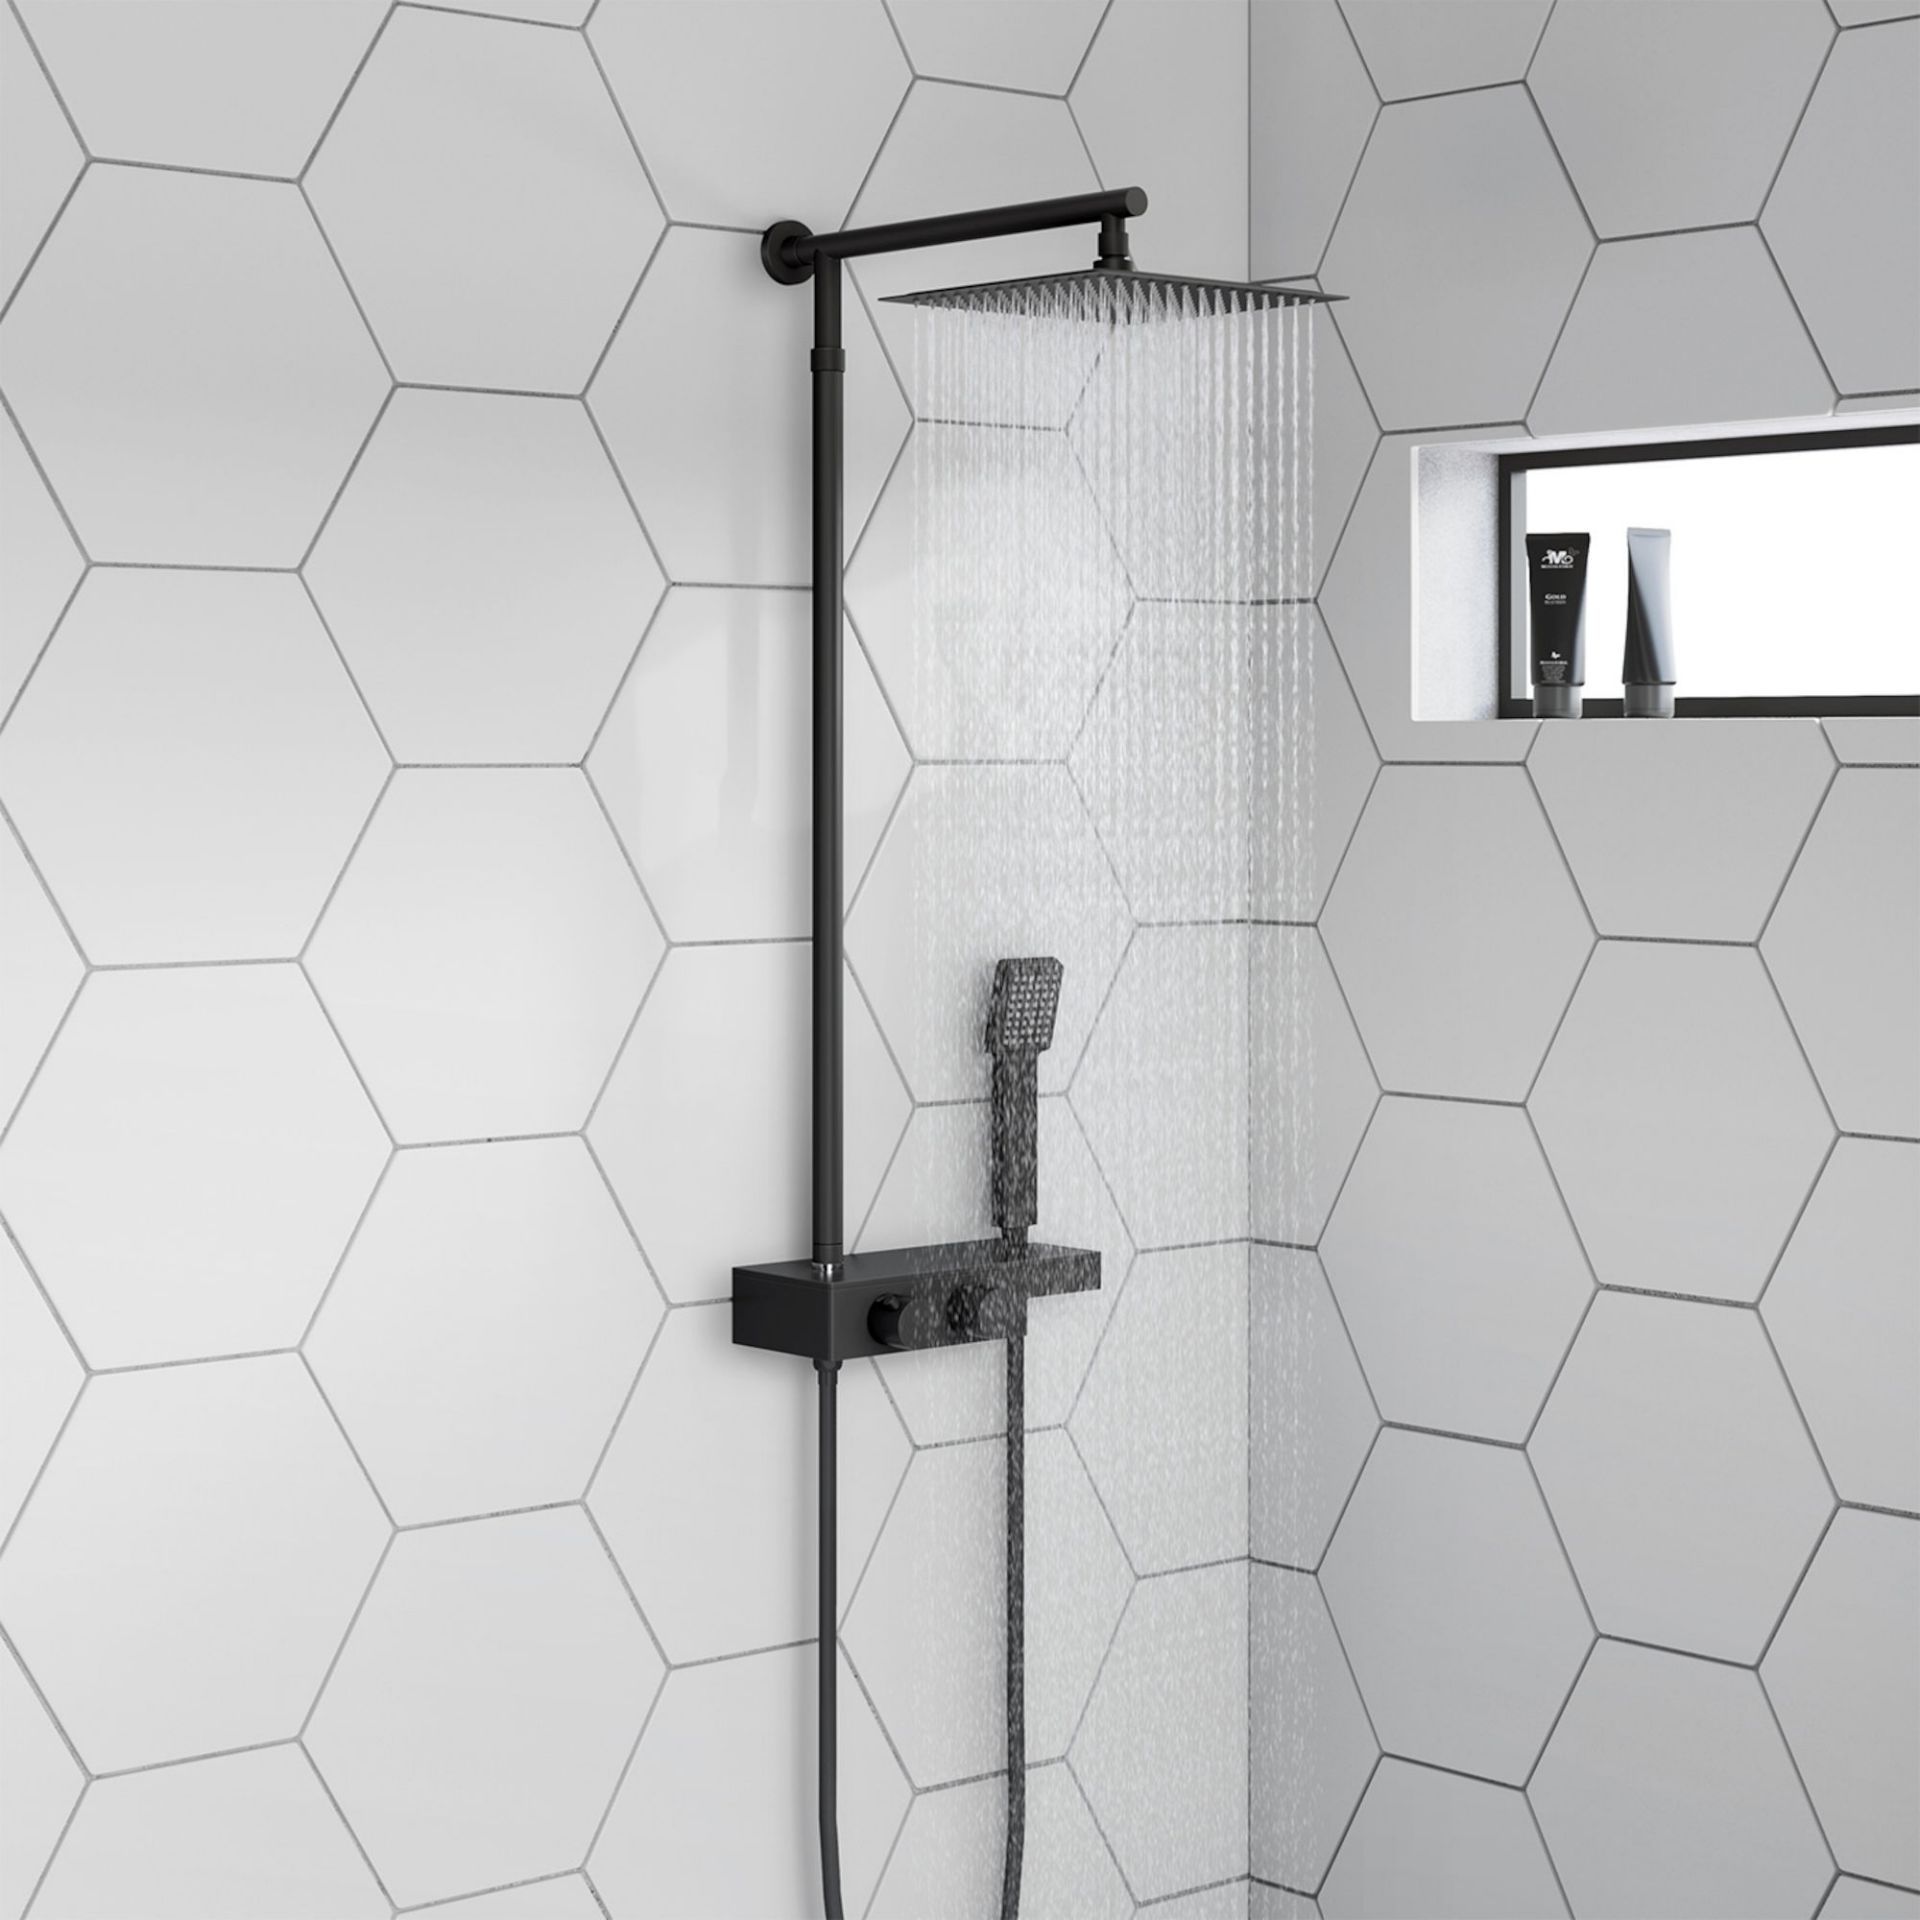 NEW & BOXDED Matte Black Square Thermostatic Mixer Shower Kit & Shelf. RRP £599.99.SP5102BLK ... - Image 3 of 3